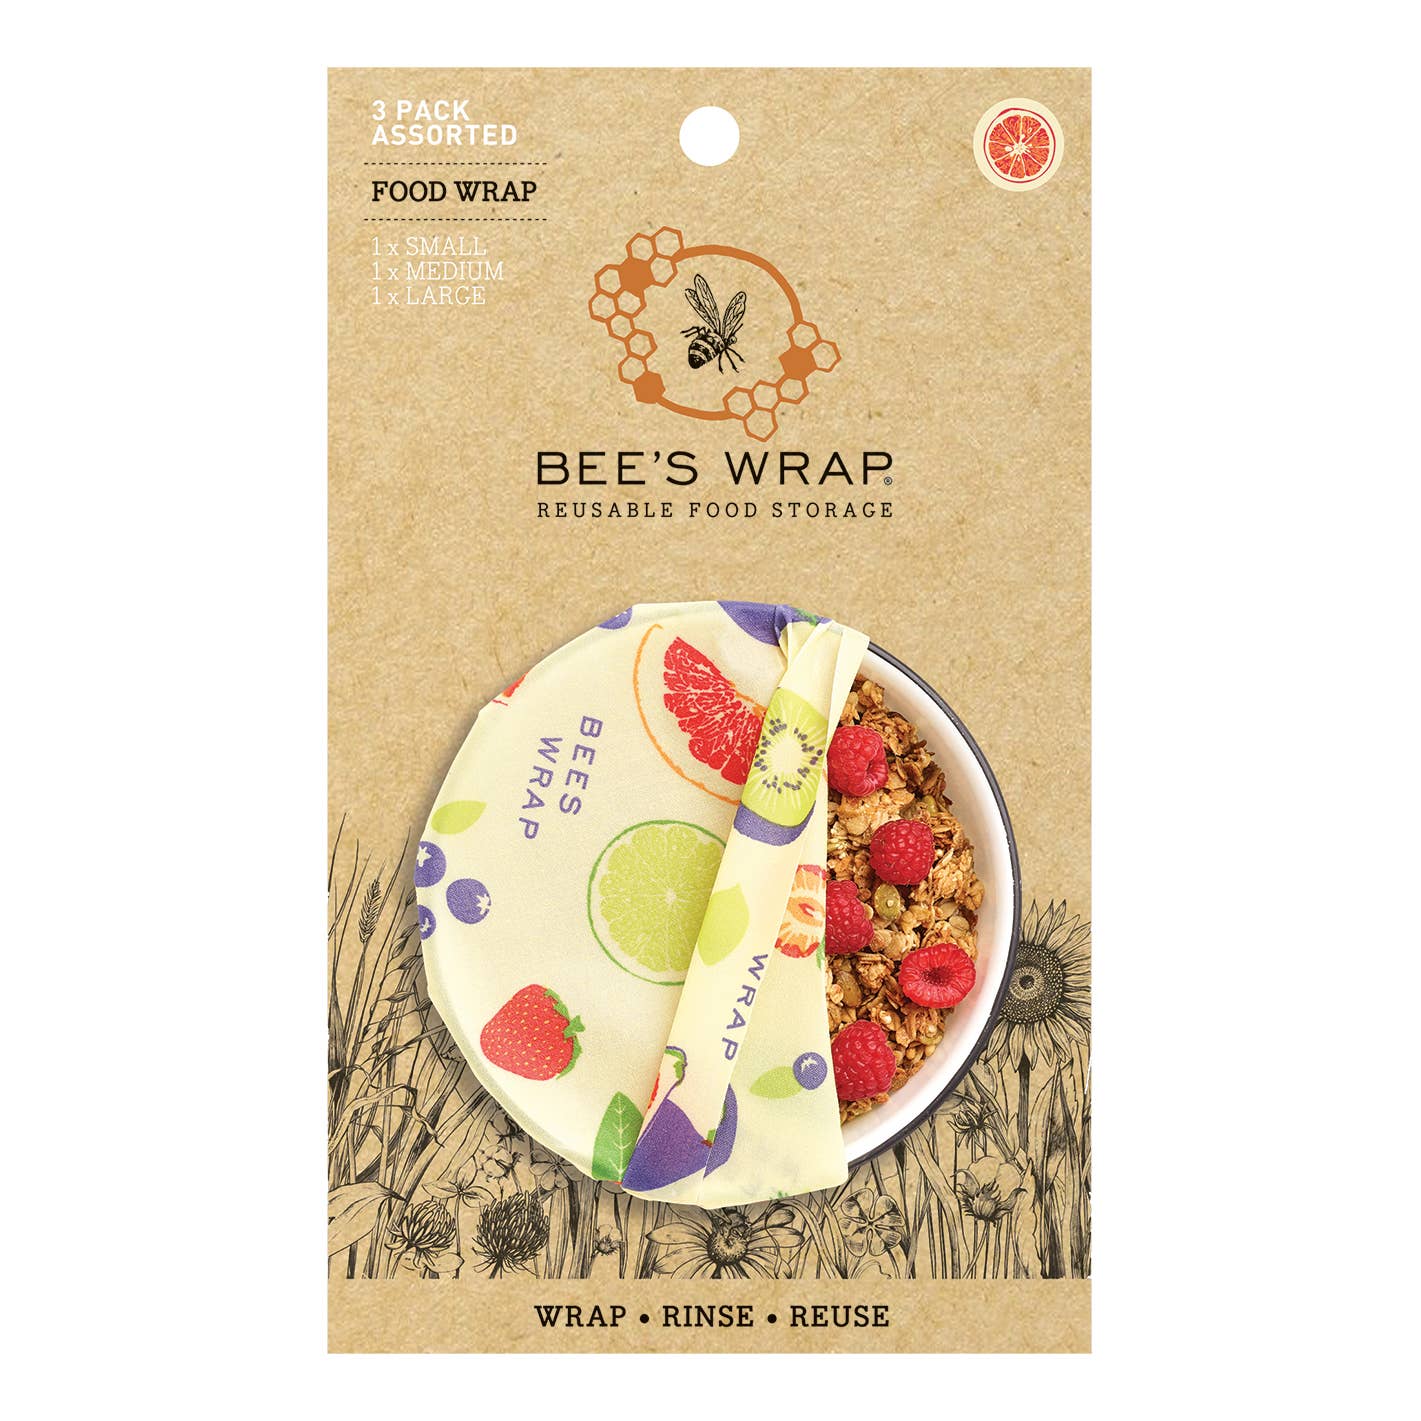 Bee's Wrap - Variety Pack